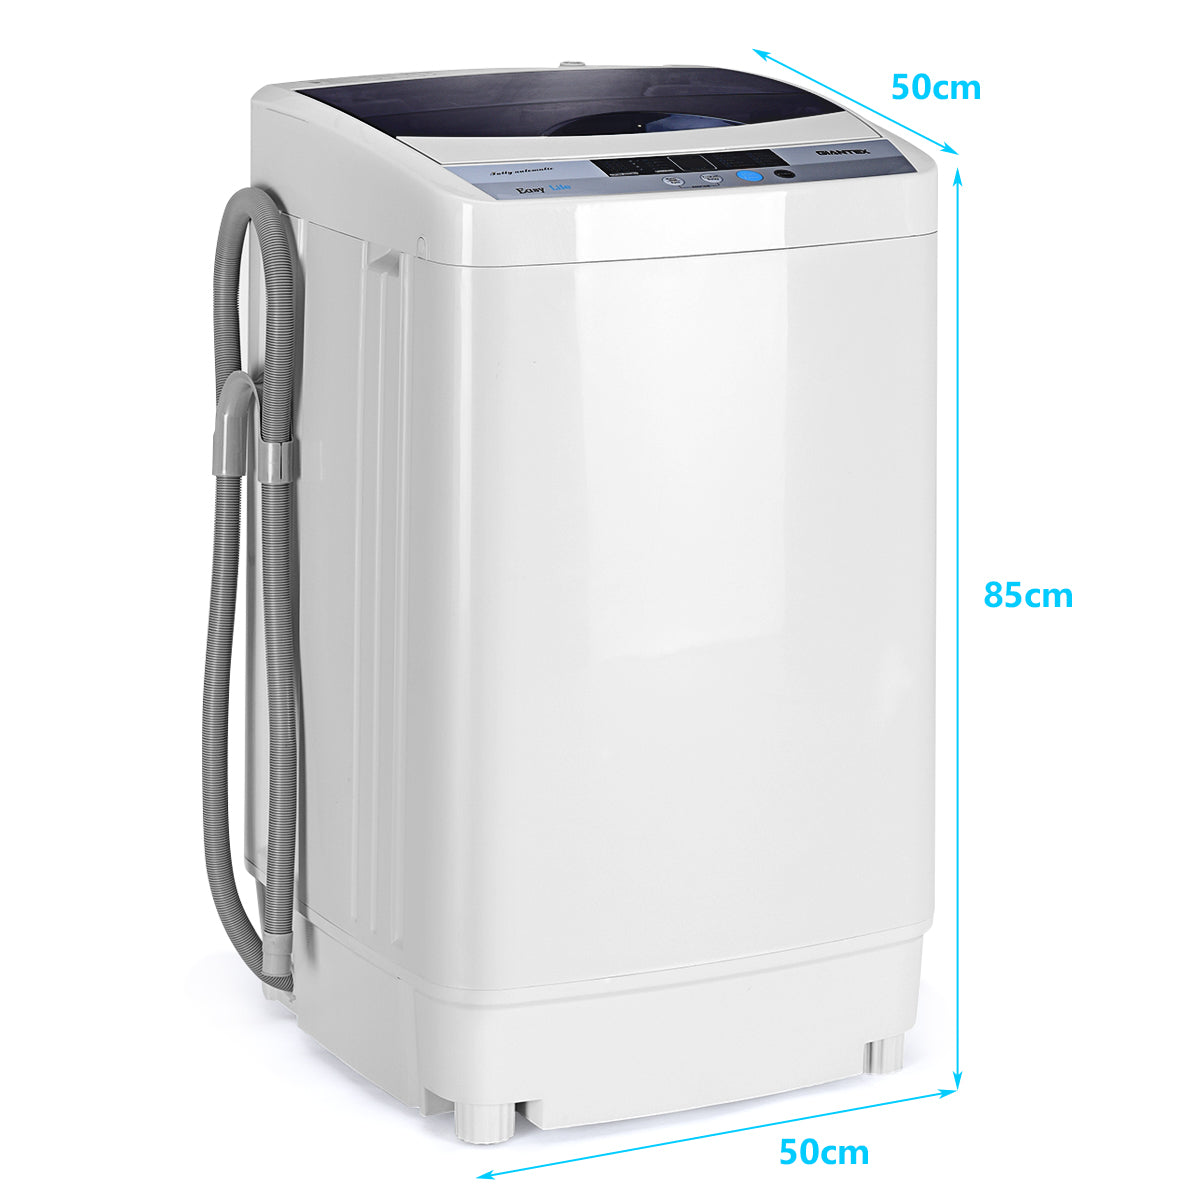 Giantex Full Automatic Washing Machine, 7.7lbs Portable Washer w/Heating  Functions, Compact Laundry Washer for Apt/Dorm/RV